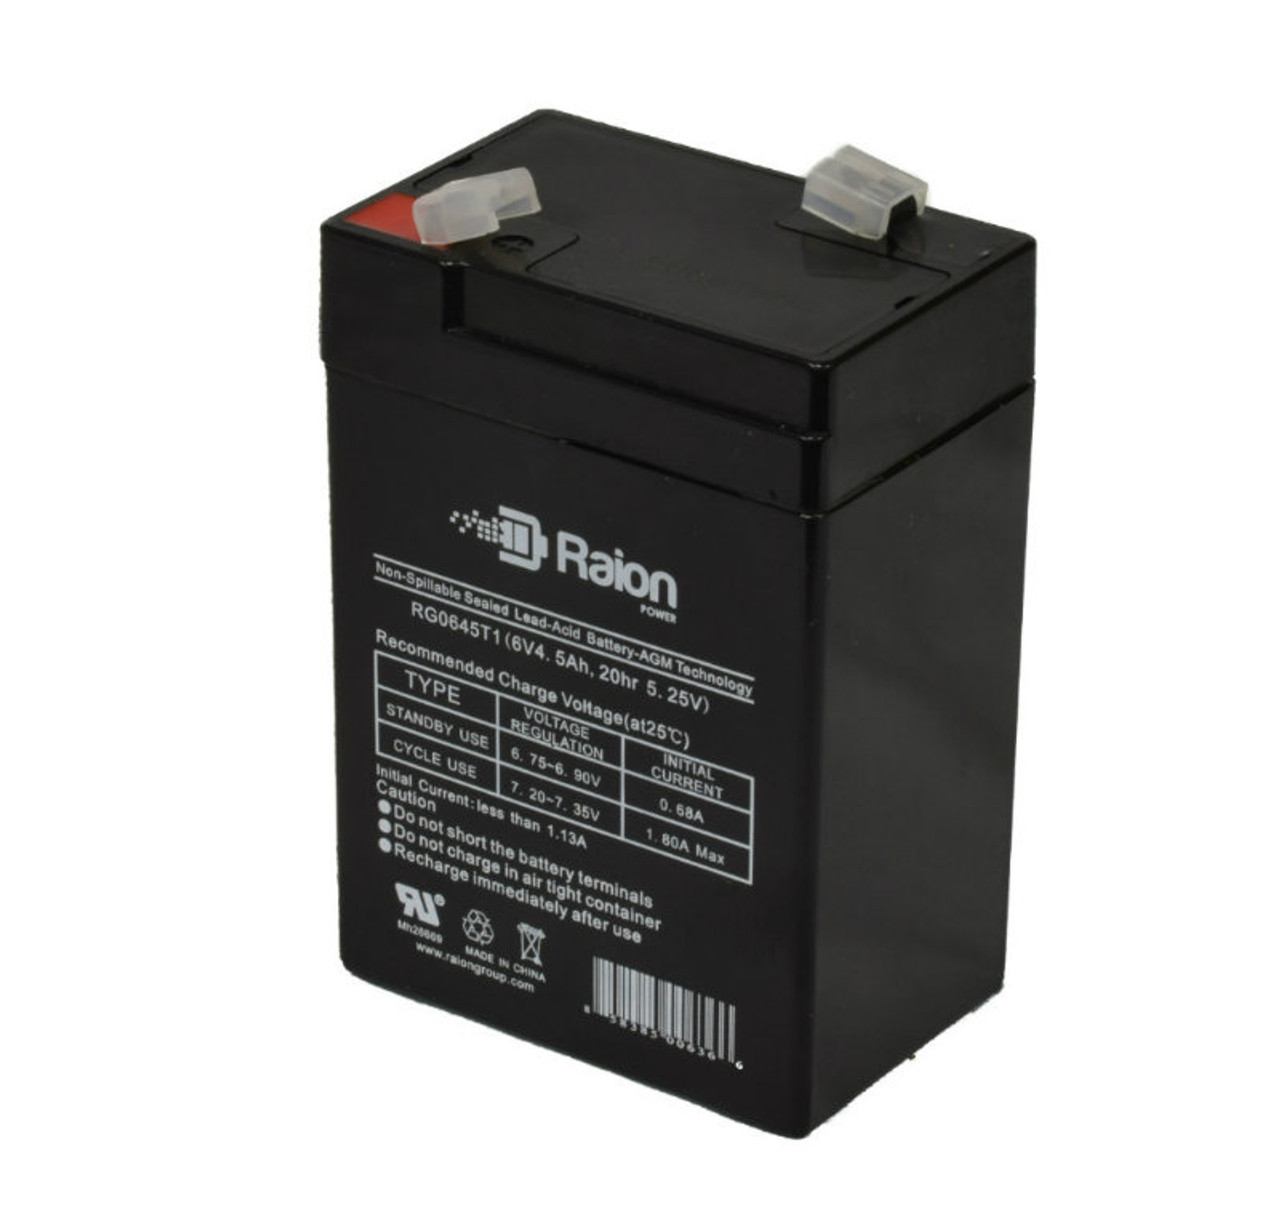 Raion Power RG0645T1 6V 4.5Ah Replacement Battery Cartridge for Bently Laboratories Inc SM-0200